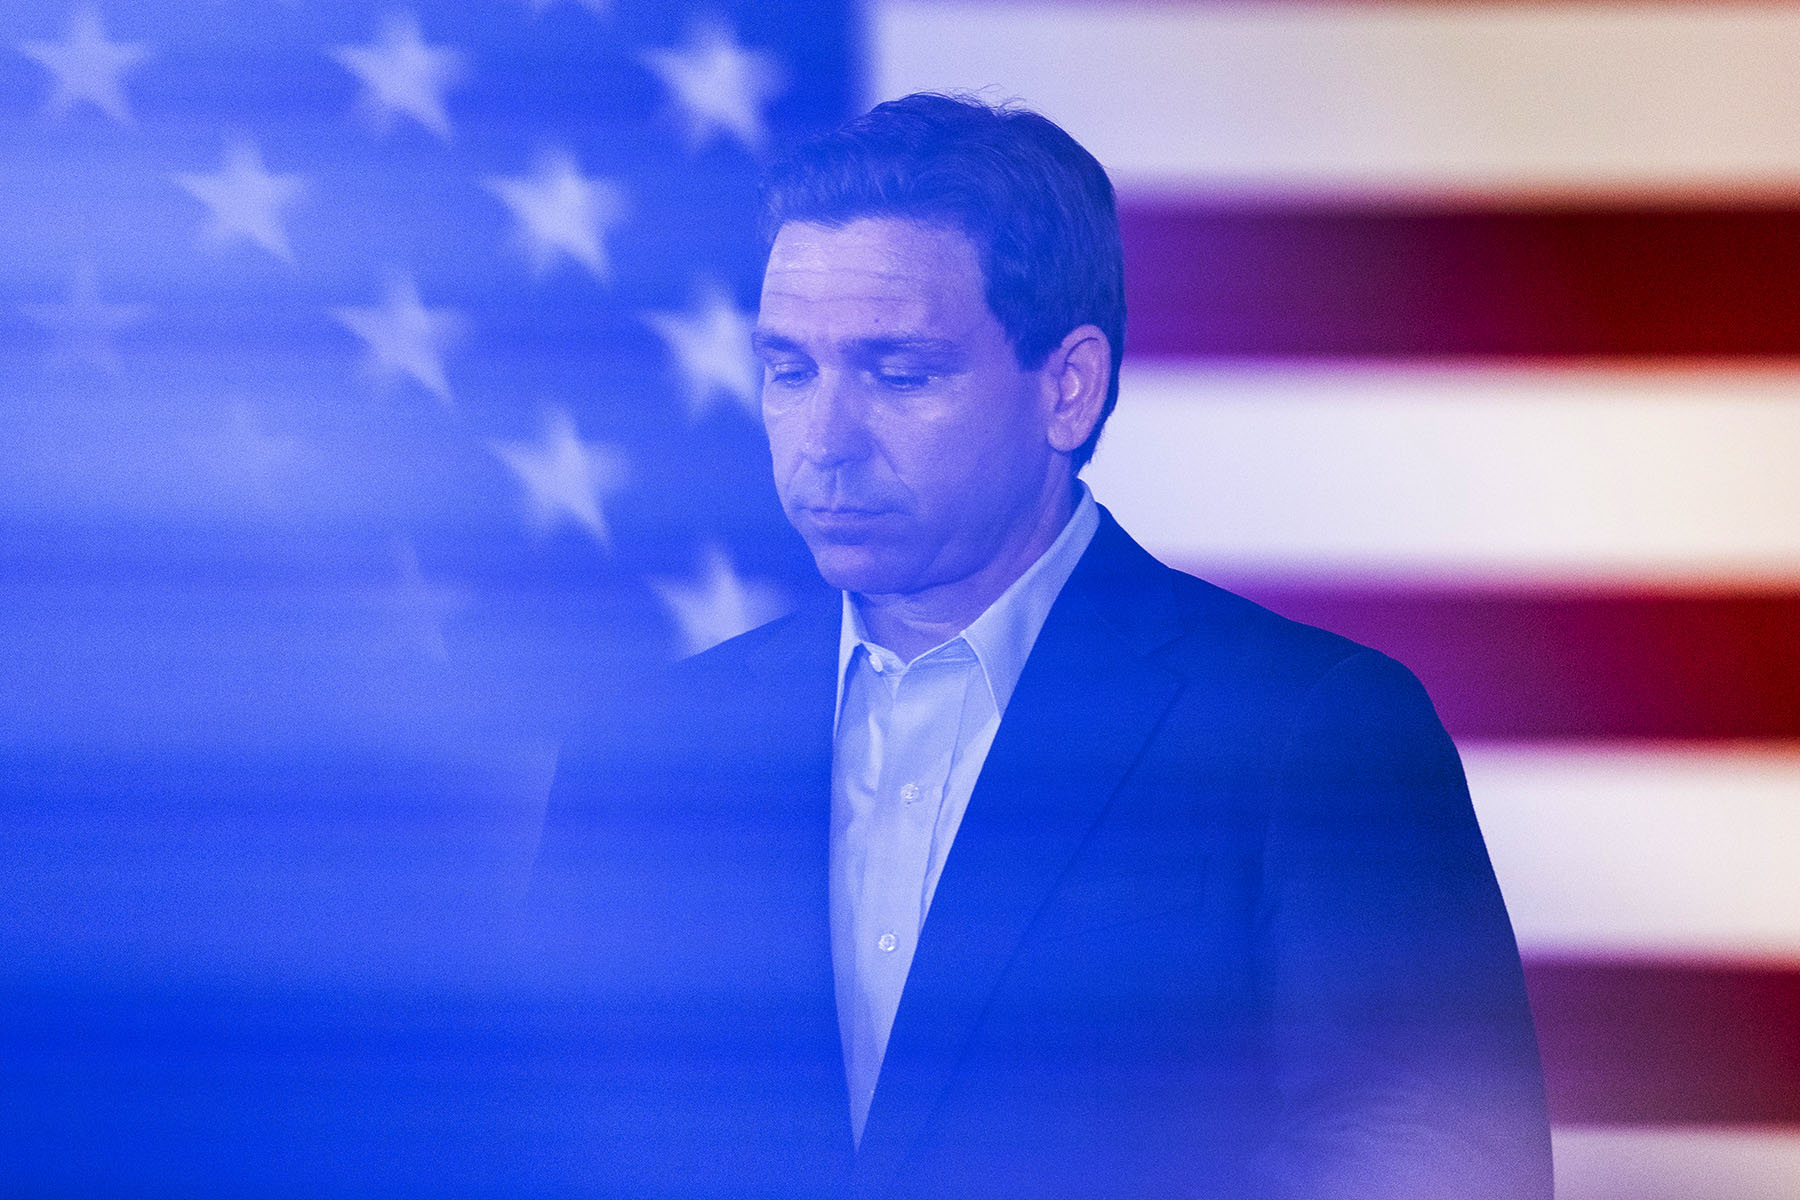 Governor Ron DeSantis speaks in front of a large american flag during a town hall event.